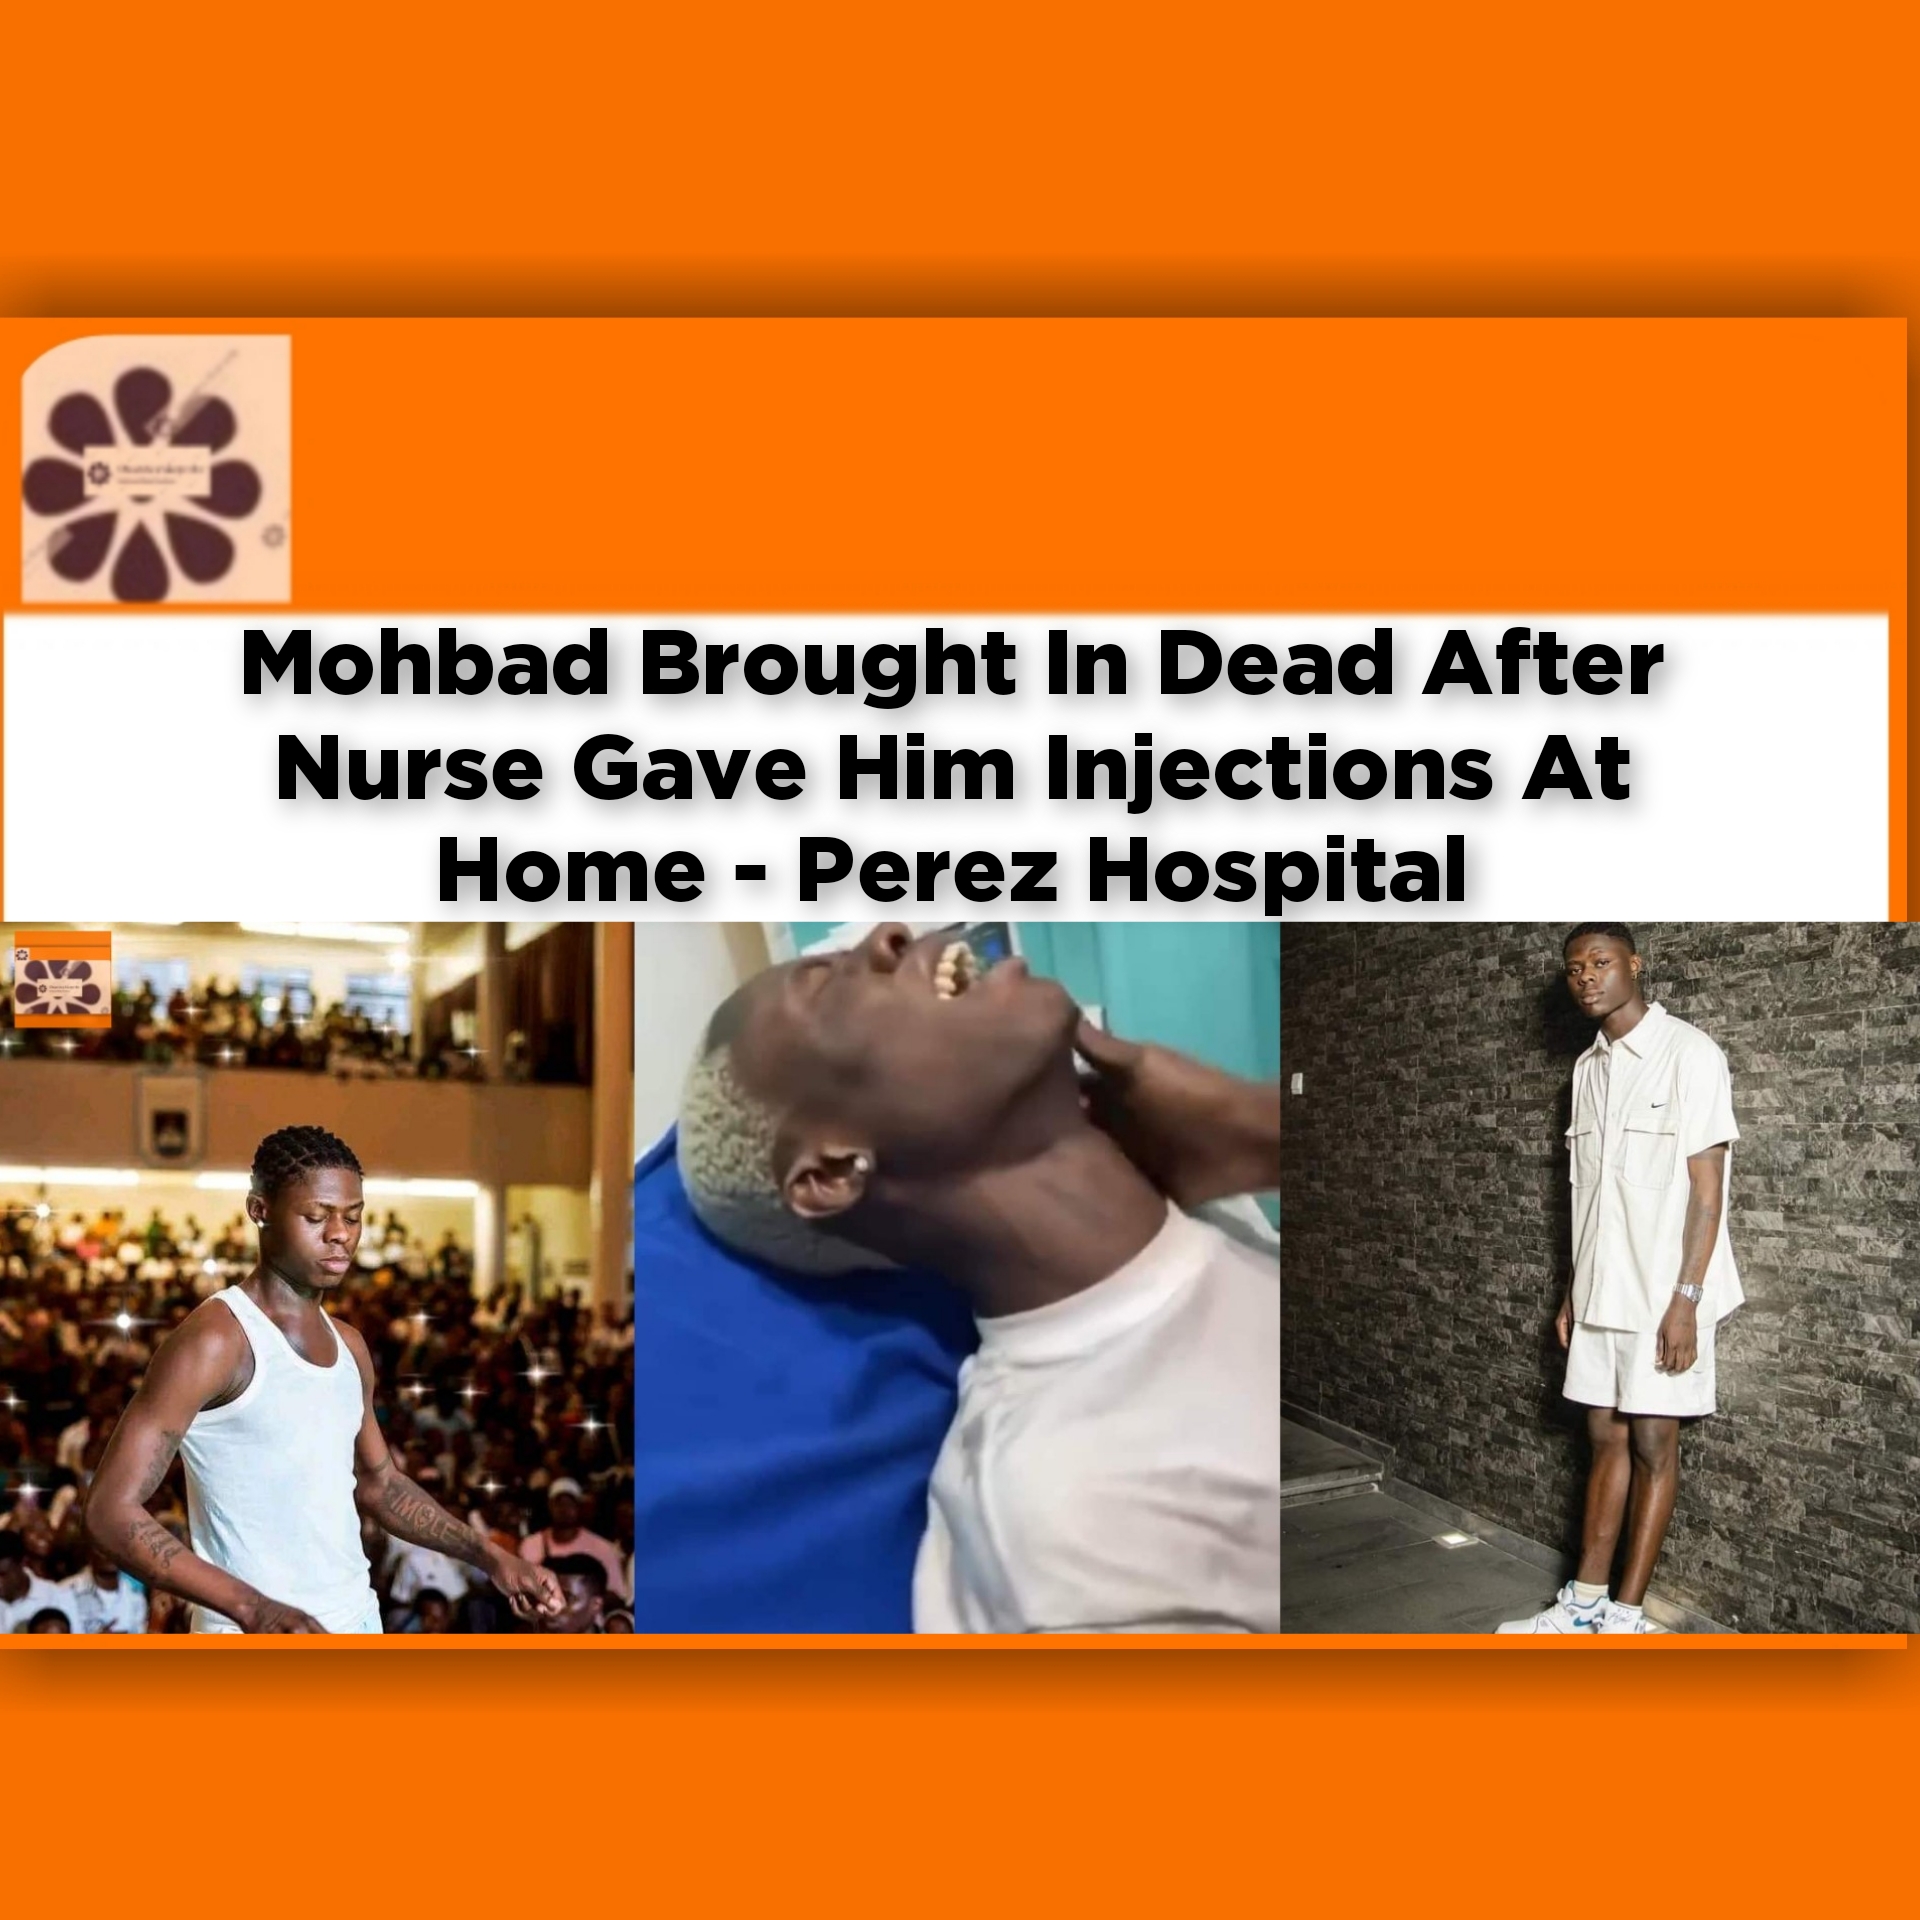 Mohbad Brought In Dead After Nurse Gave Him Injections At Home - Perez Hospital ~ OsazuwaAkonedo #President